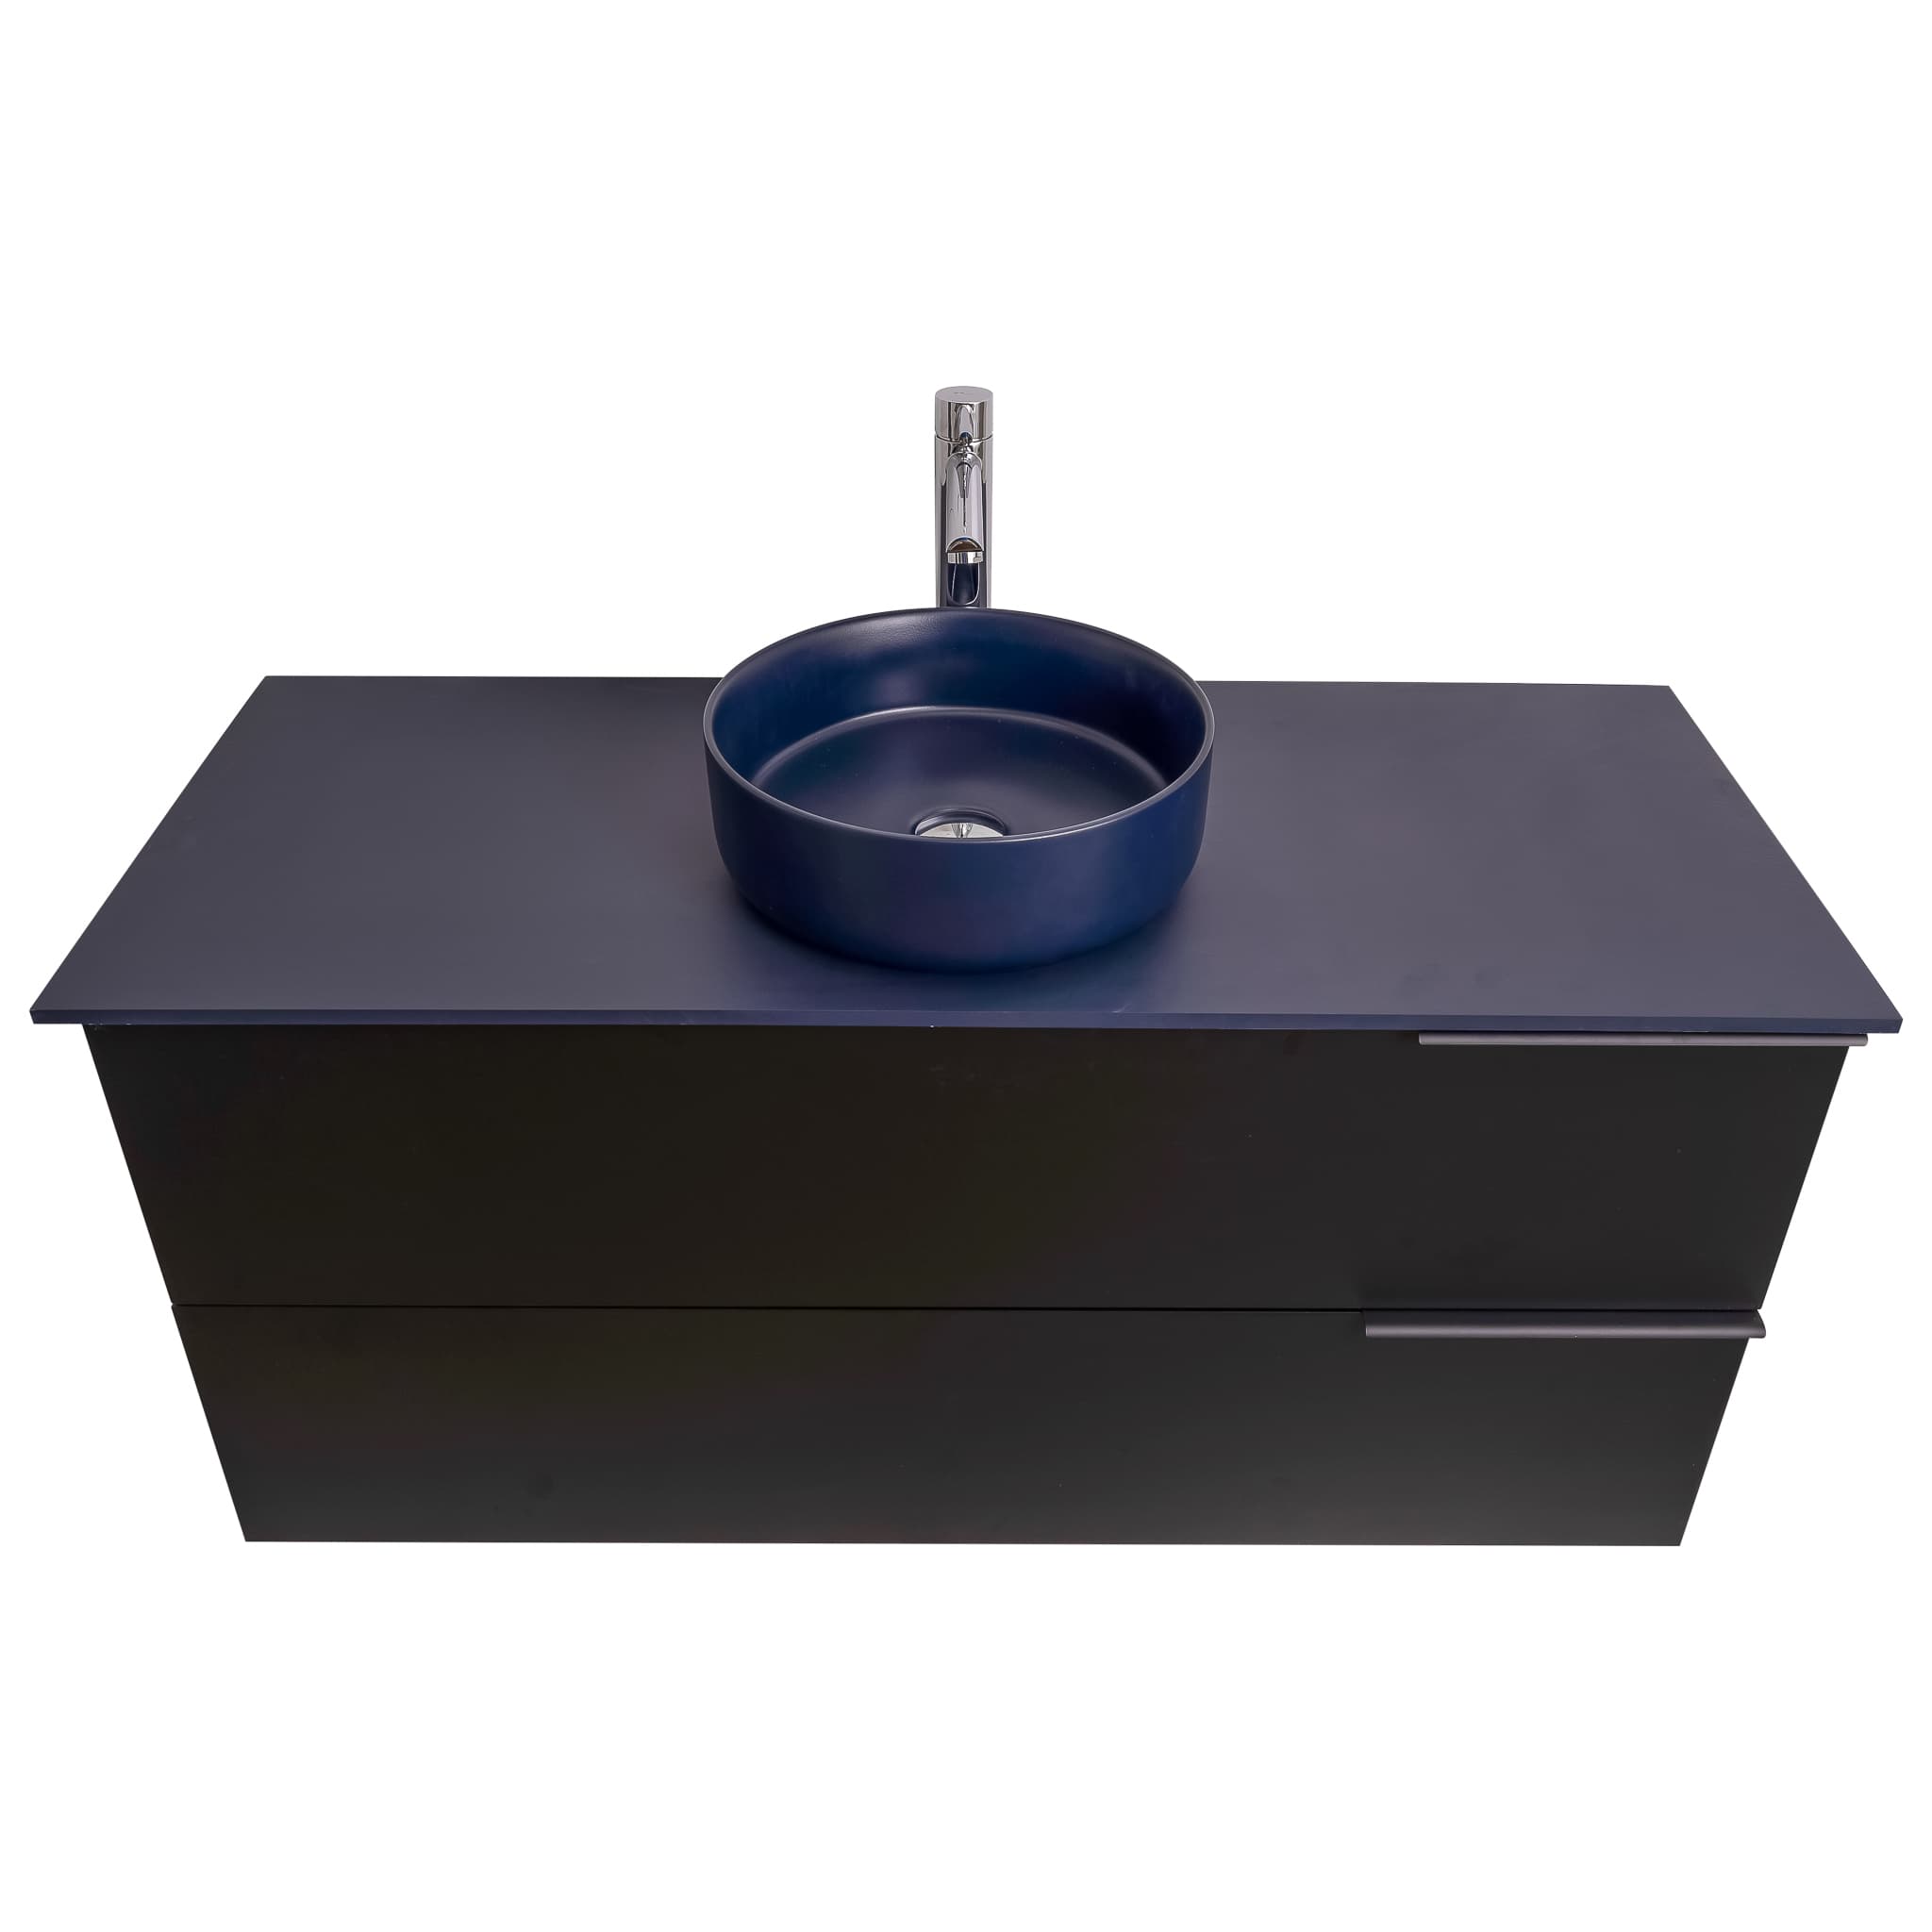 Mallorca 47.5 Matte Black Cabinet, Ares Navy Blue Top And Ares Navy Blue Ceramic Basin, Wall Mounted Modern Vanity Set